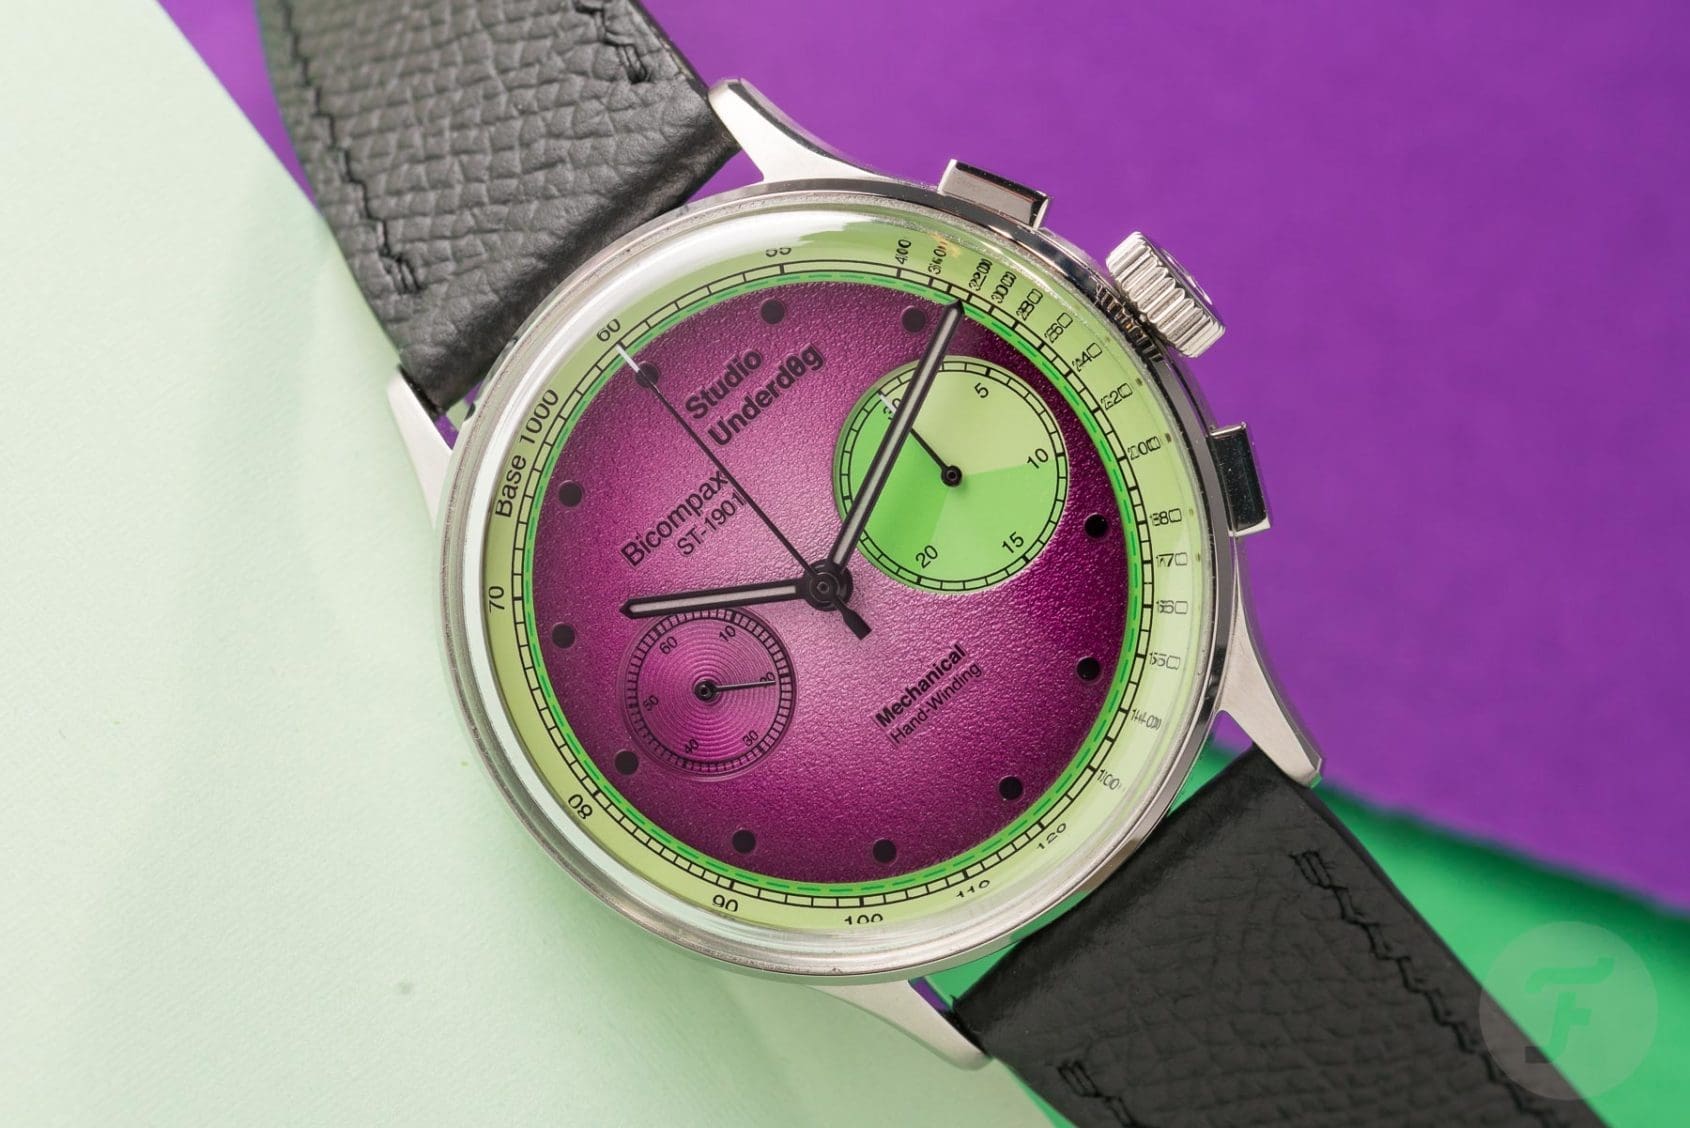 Six watches guaranteed to simply make you smile